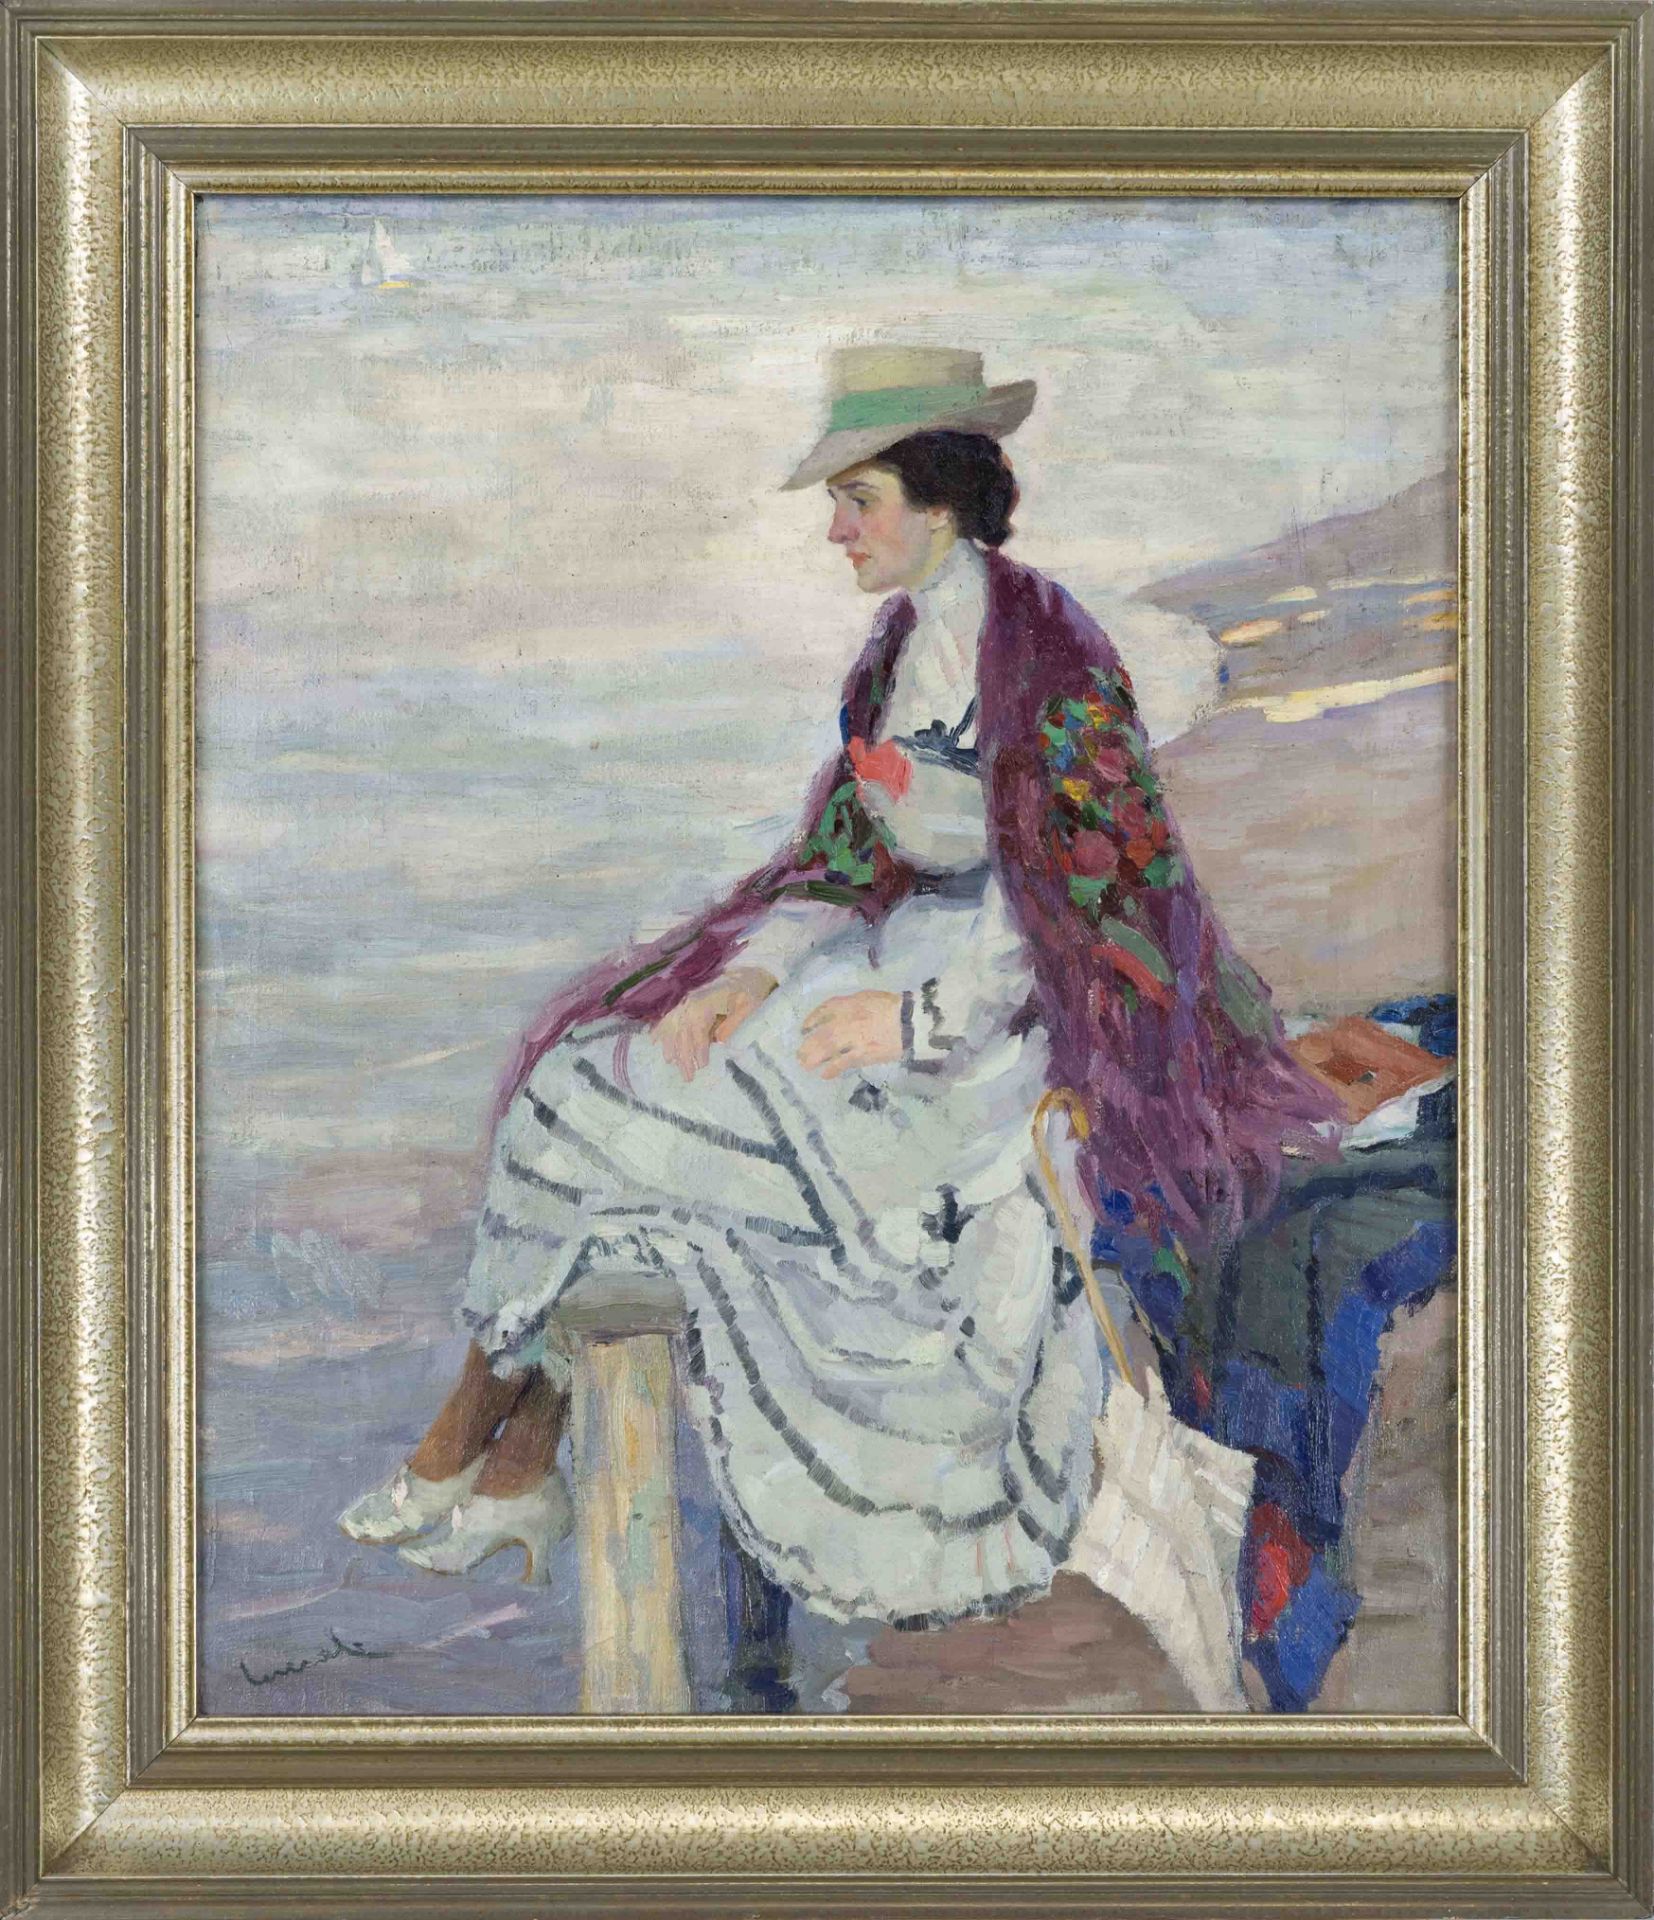 Edward Cucuel (1875-1954), American Impressionist painter, who also worked in Berlin during his